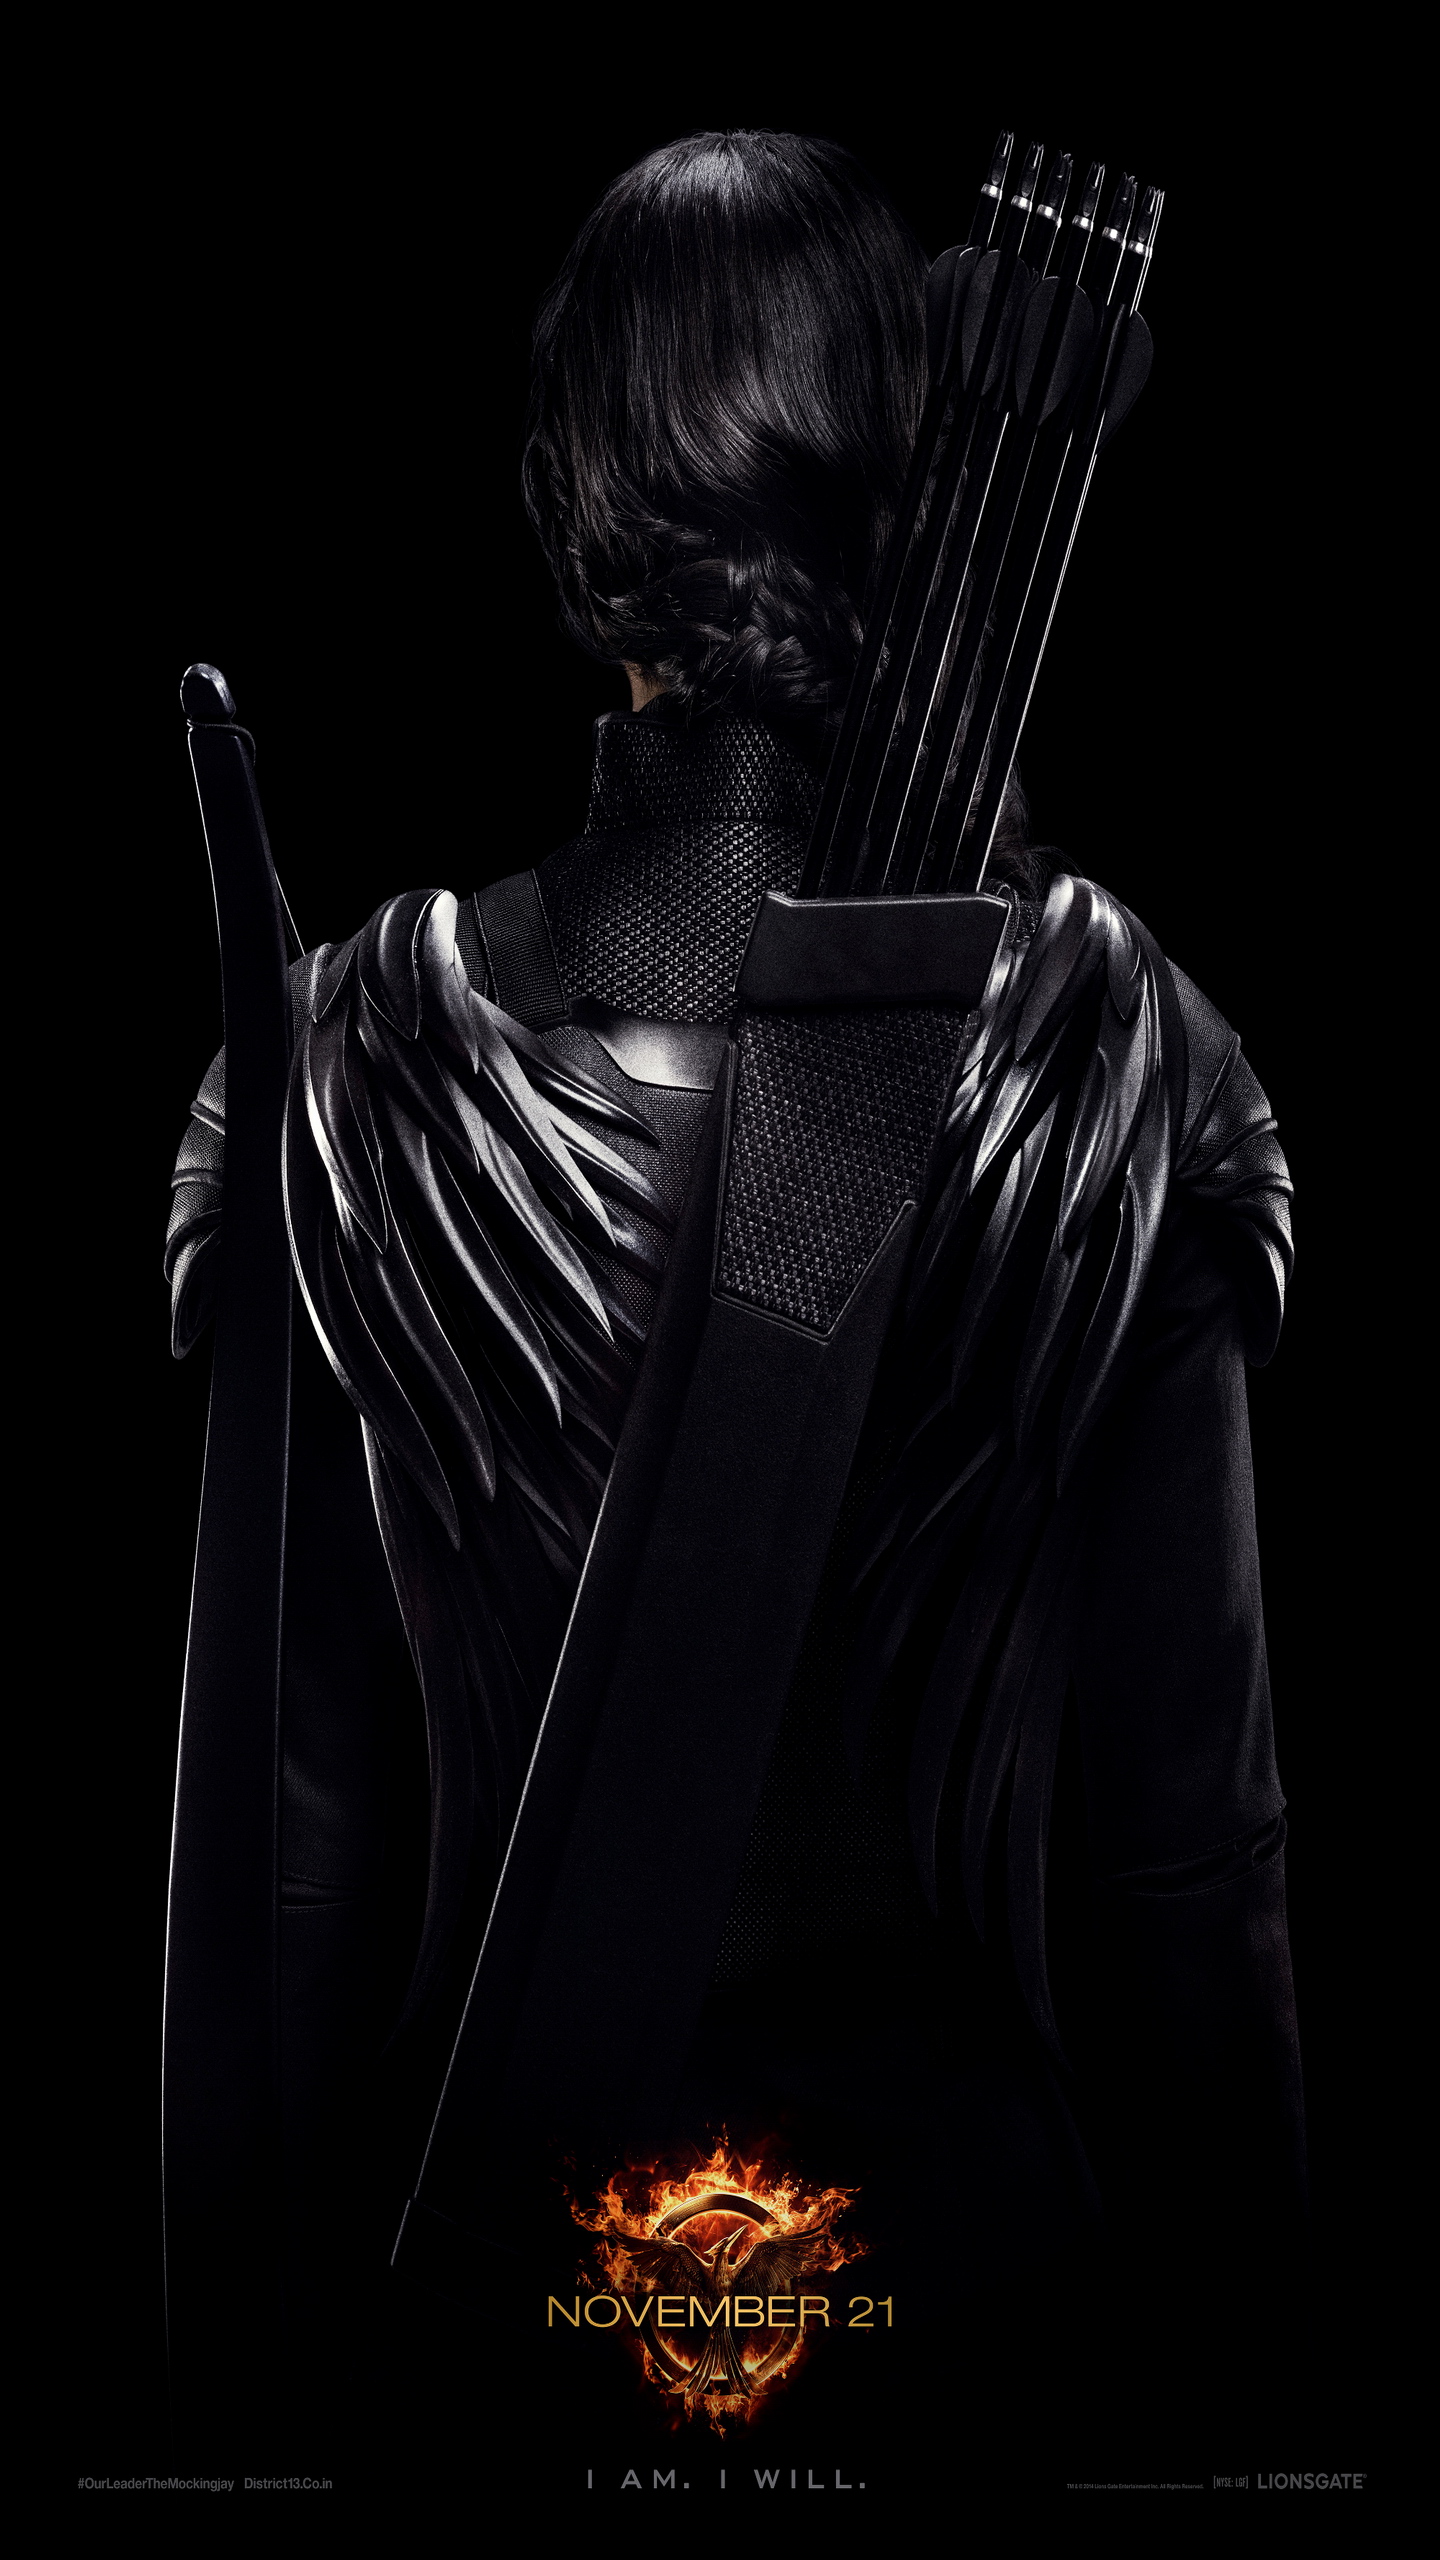 Mockingjay   Part 1 Galaxy Note 4 Wallpaper Archives   Wallpapers 1440x2560